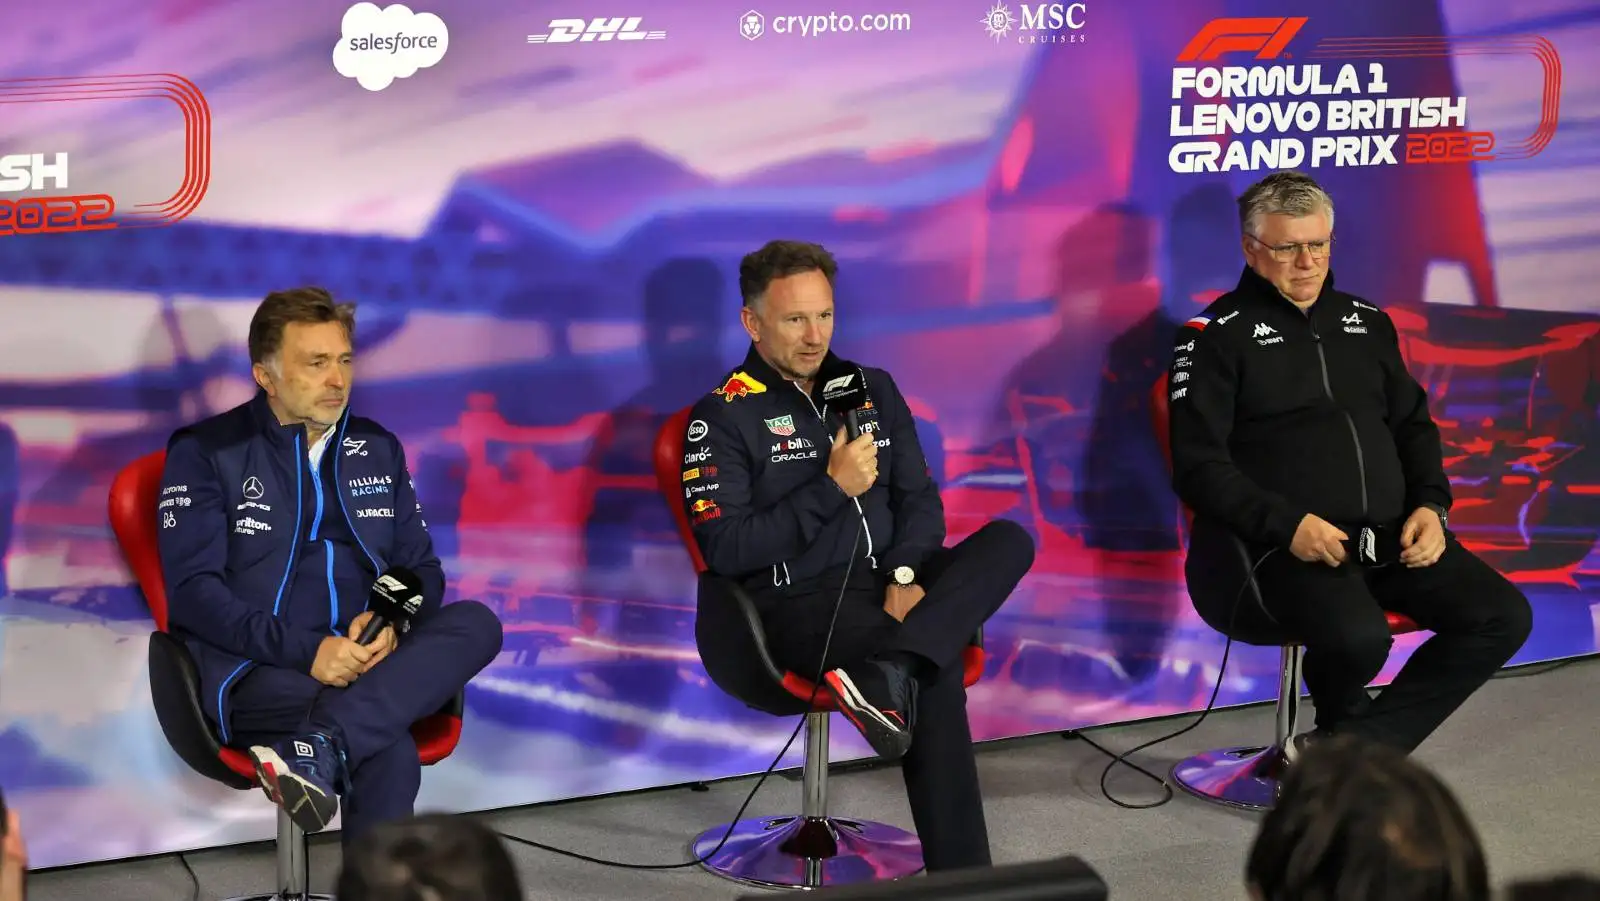 Christian Horner, Jost Capito and Otmar Szafnauer at a press conference. Silverstone July 2022.